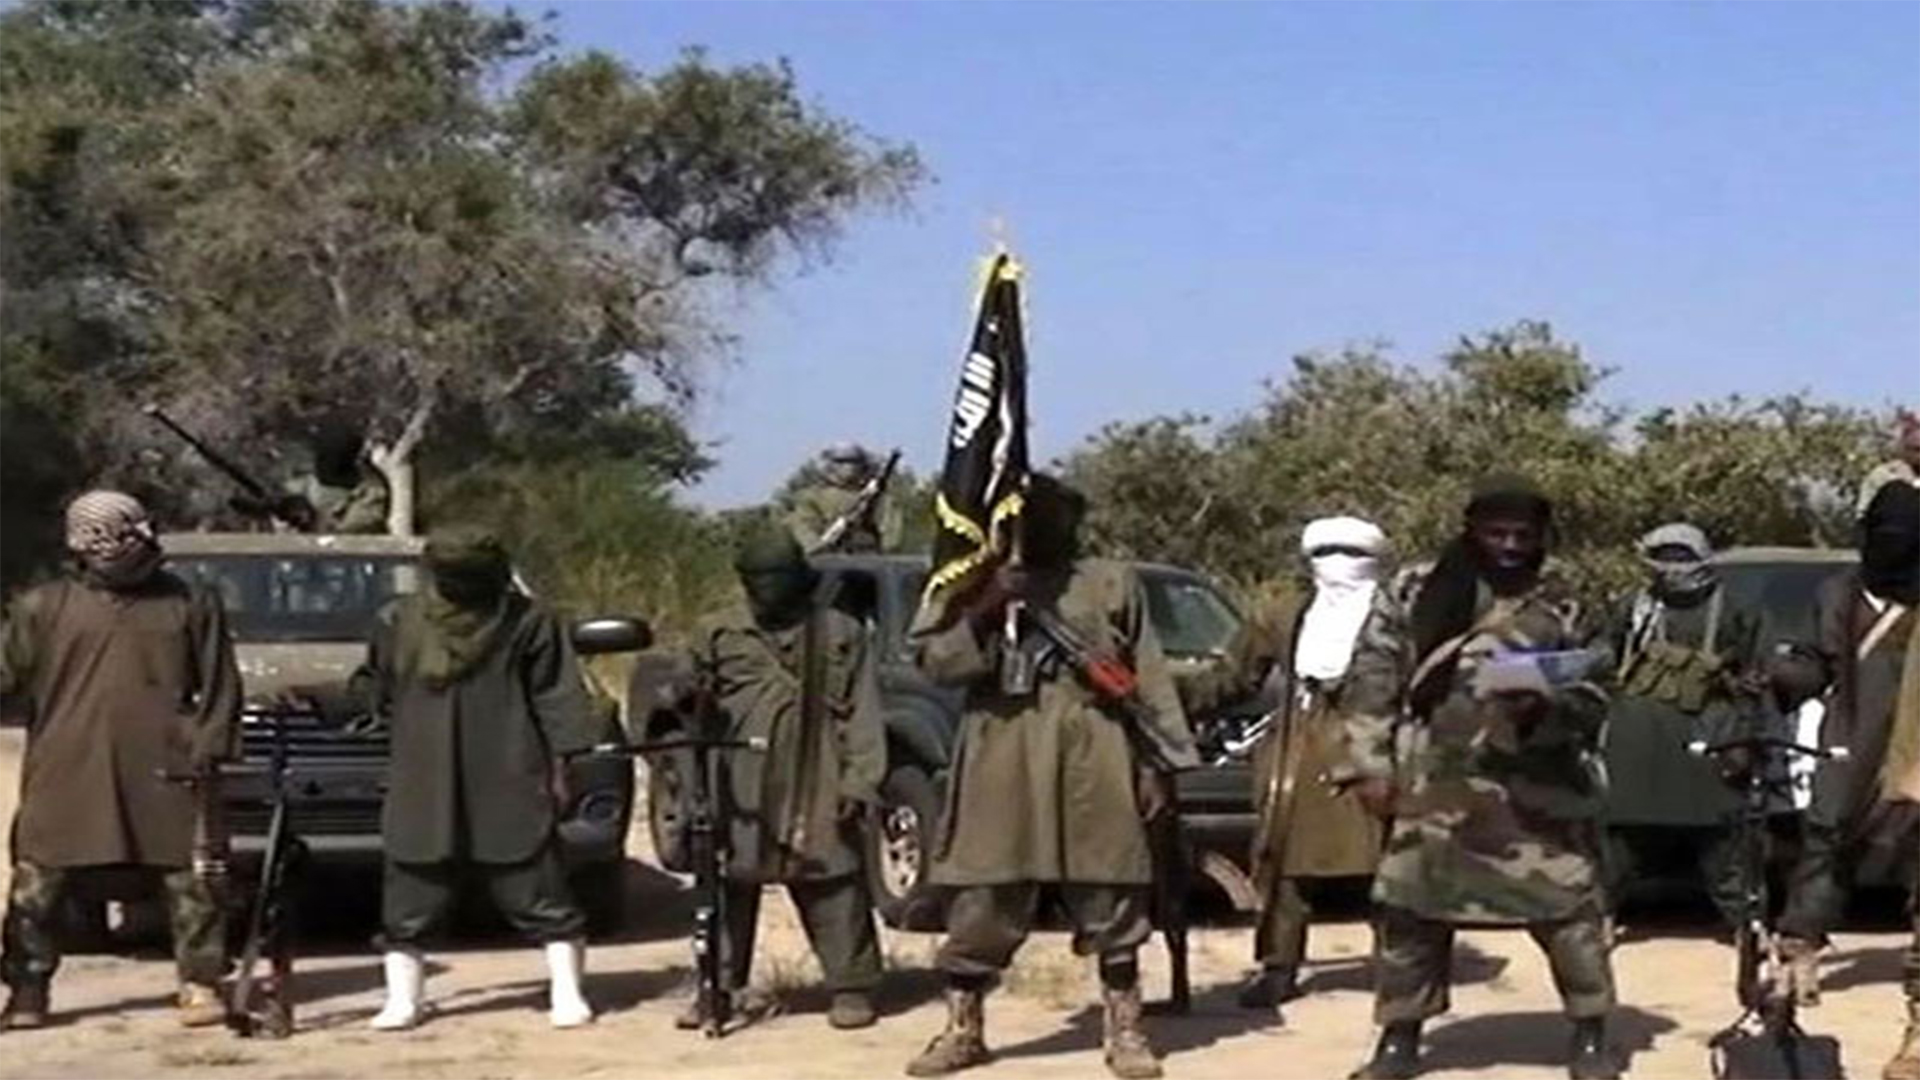 Army colonel, captain, others killed in Boko Haram clash